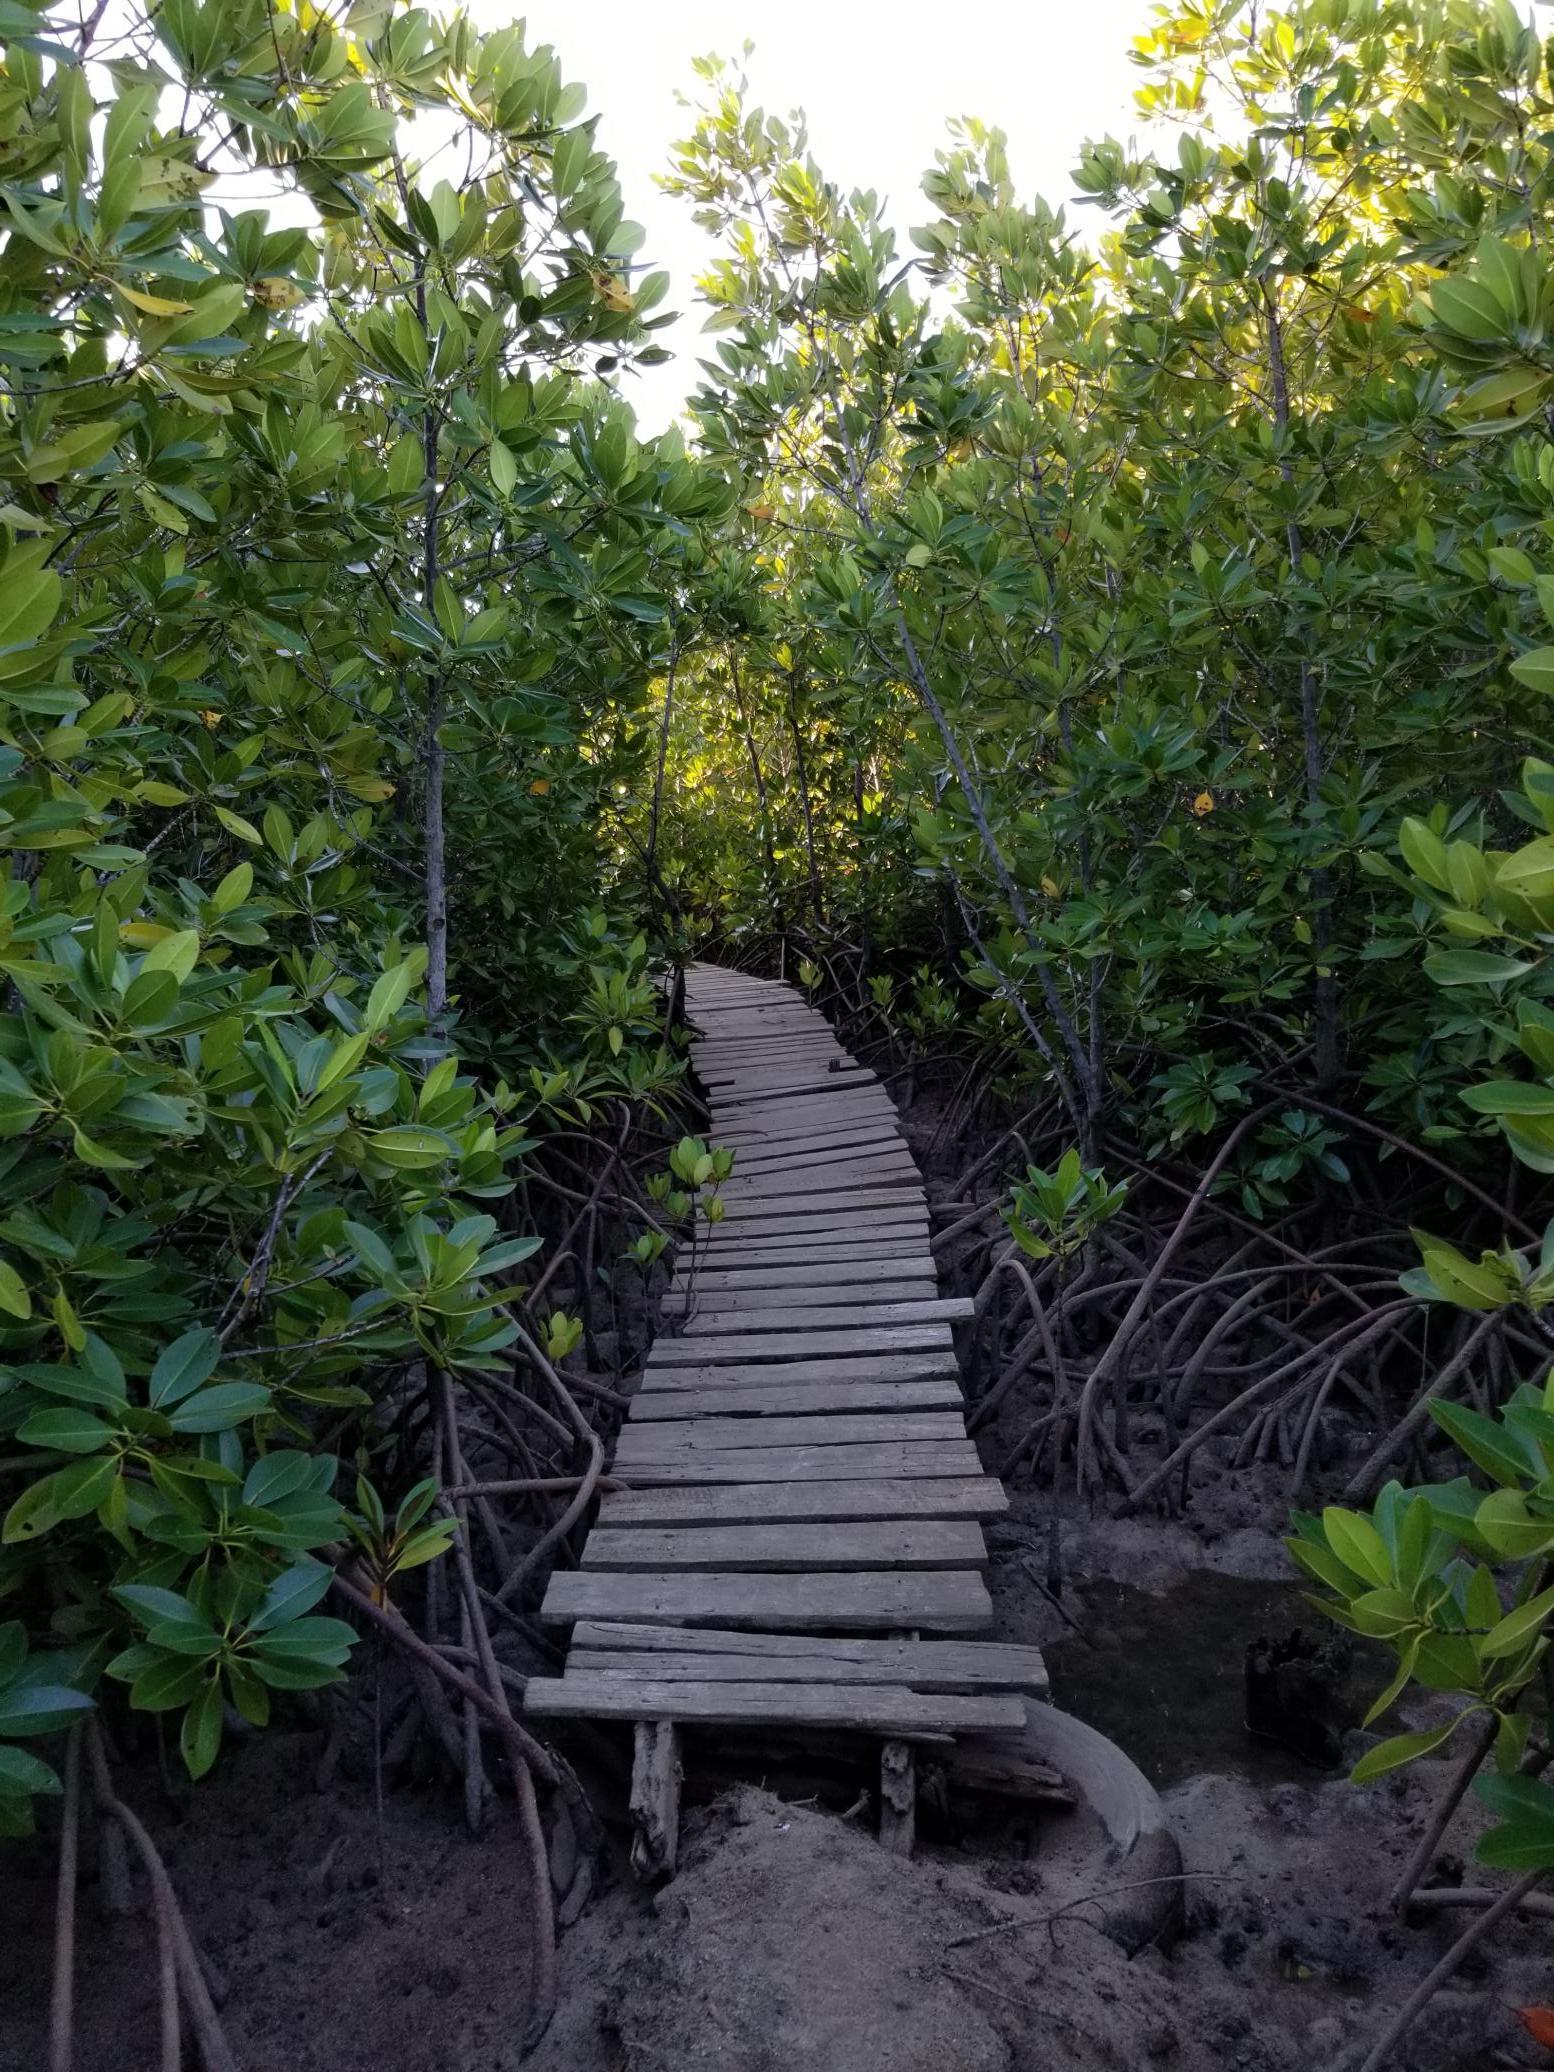 Emma Gibbons: Human touch amidst nature's embrace: a man-made walkway winds through the rejuvenated heart of the mangrove, illustrating ways mankind and the environment can both benefit.